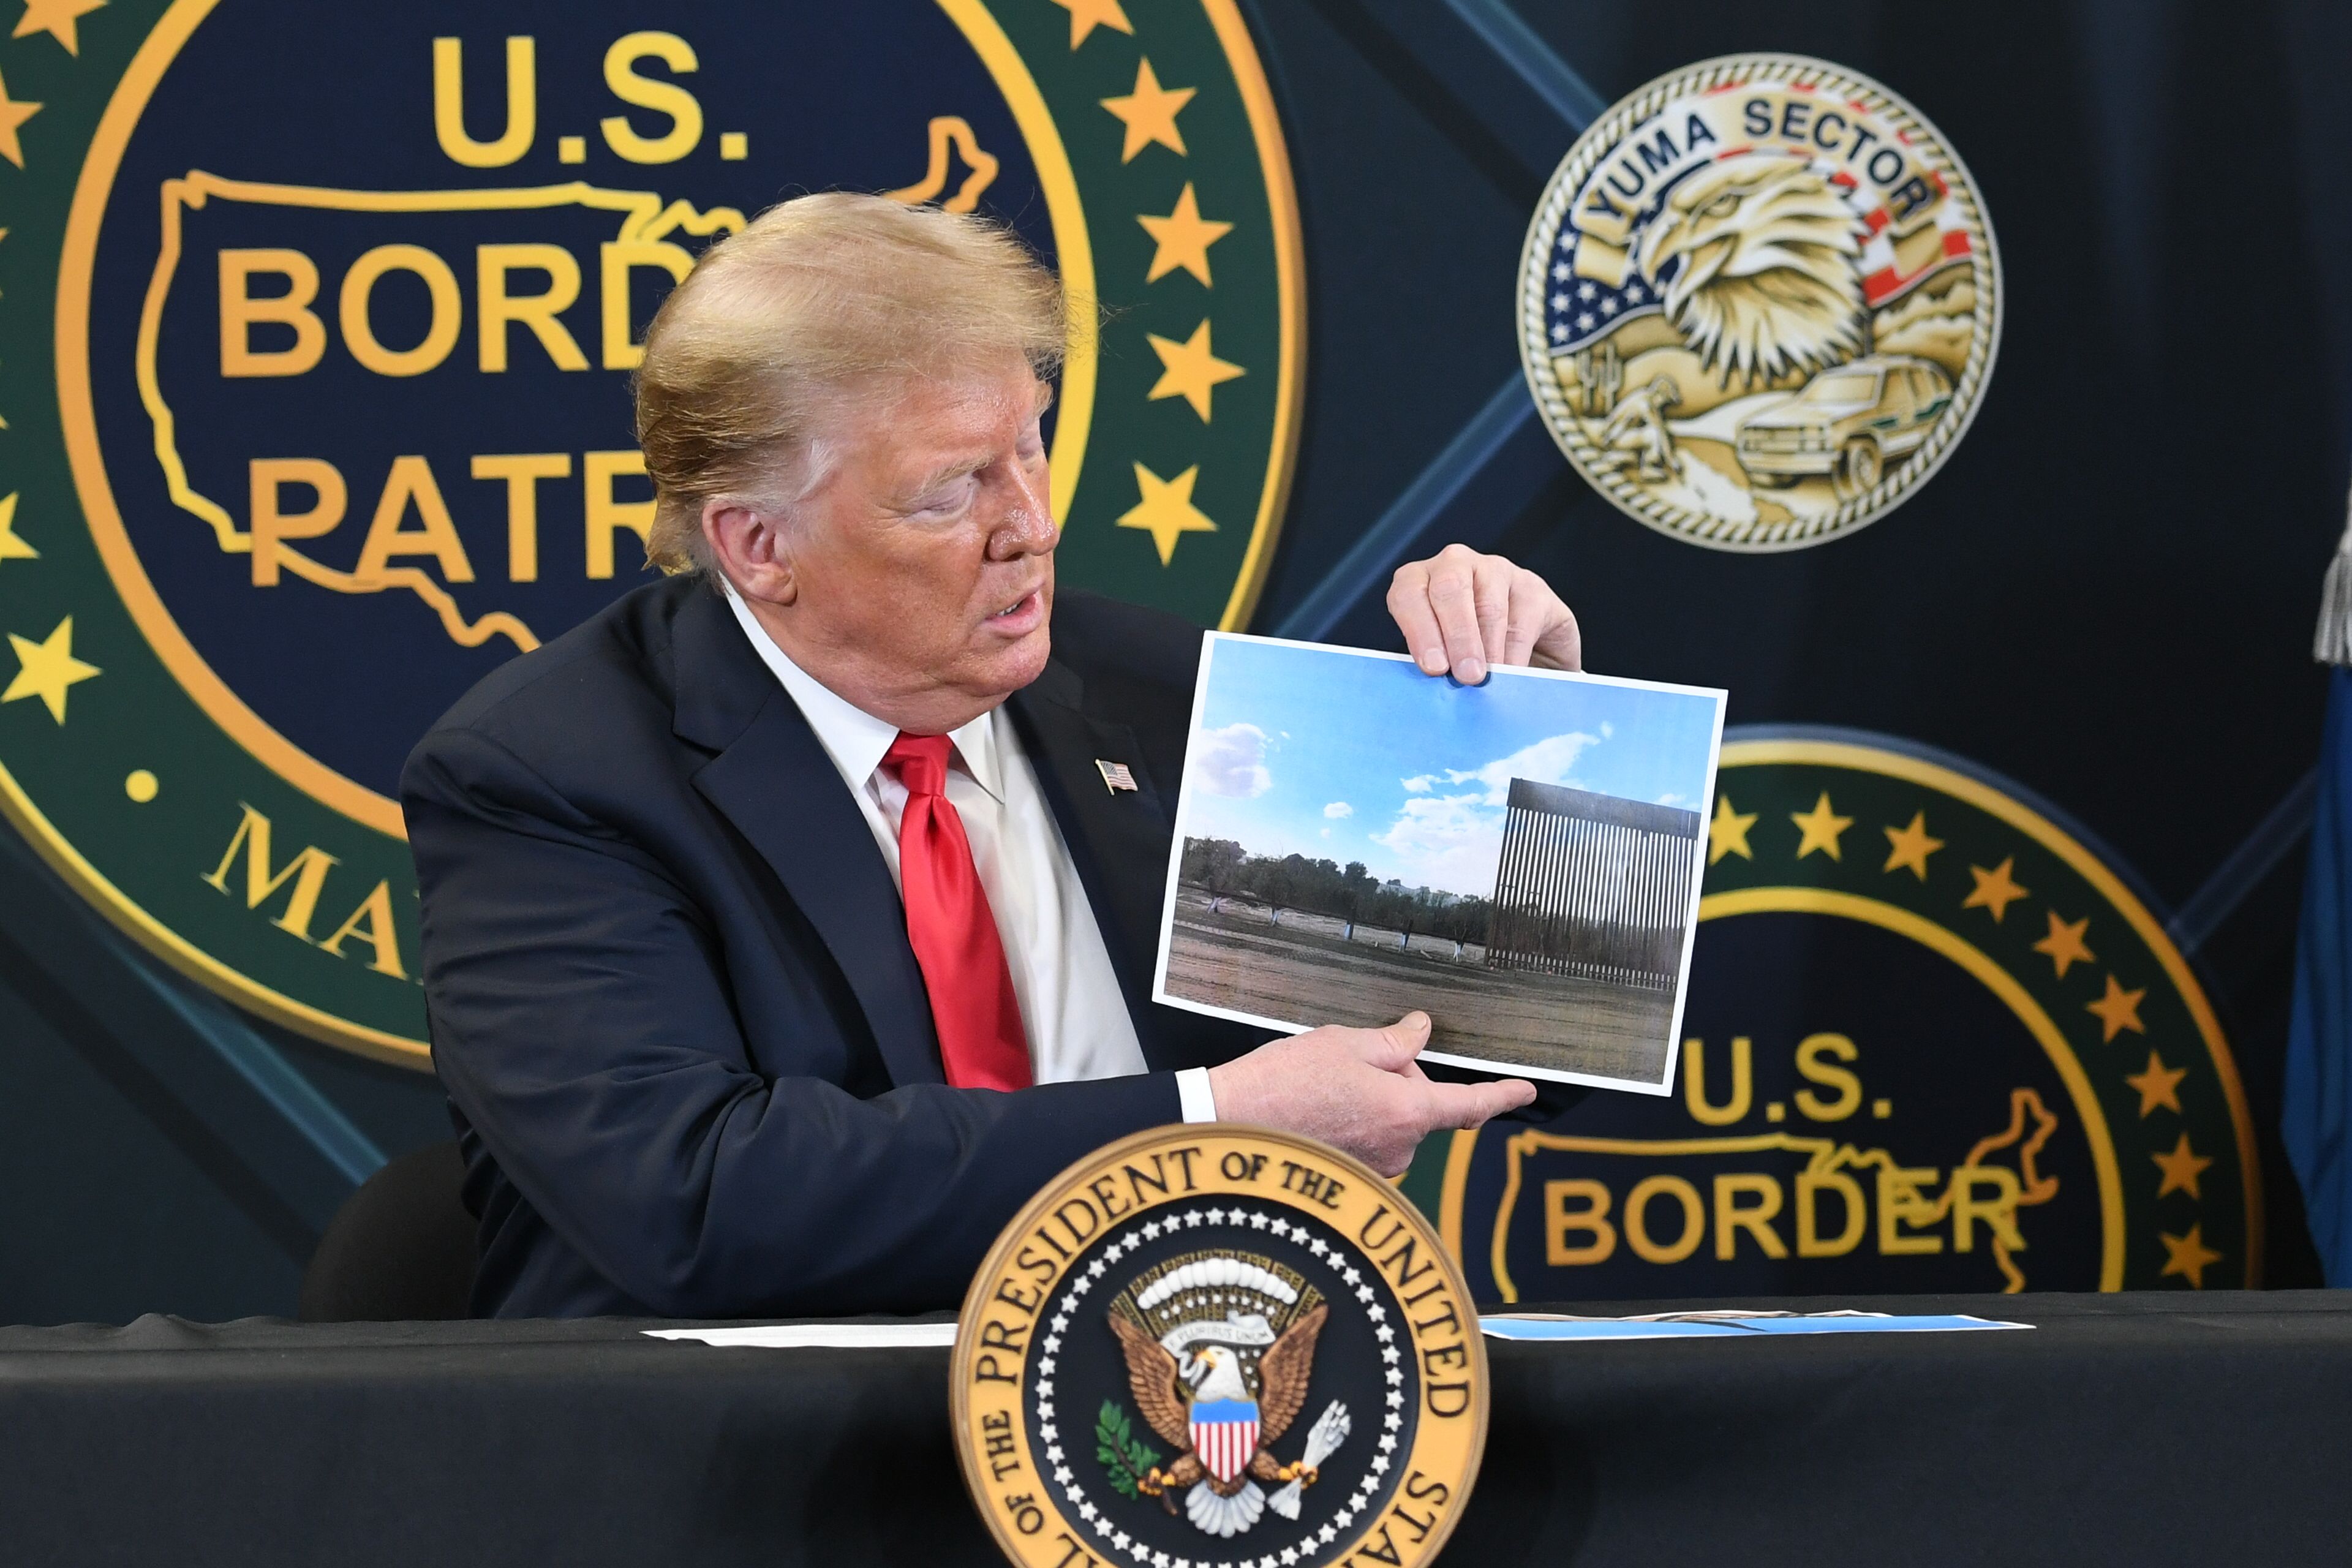 US President Donald Trump shows a photo of the border wall upon arrival at the US Border Patrol station in Yuma, Arizona, June 23, 2020, as he travels to visit the border wall with Mexico. (Photo by SAUL LOEB / AFP)